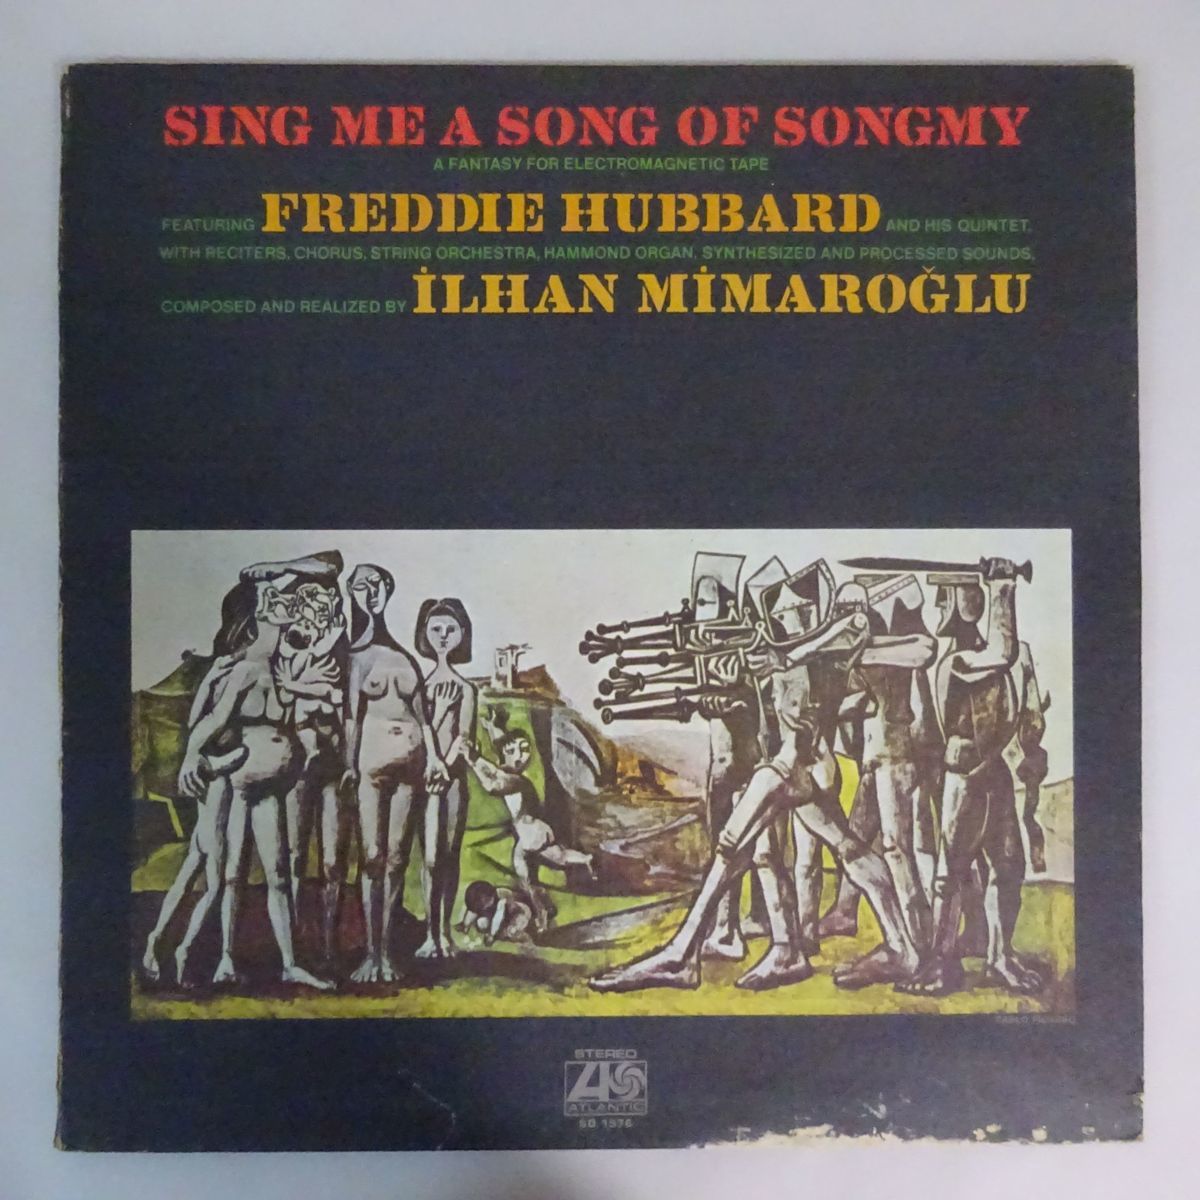 13064380;【US盤/ATLANTIC】Freddie Hubbard, ?lhan M?maroglu / Sing Me A Song Of Songmy (A Fantasy For Electromagnetic Tape)_画像1